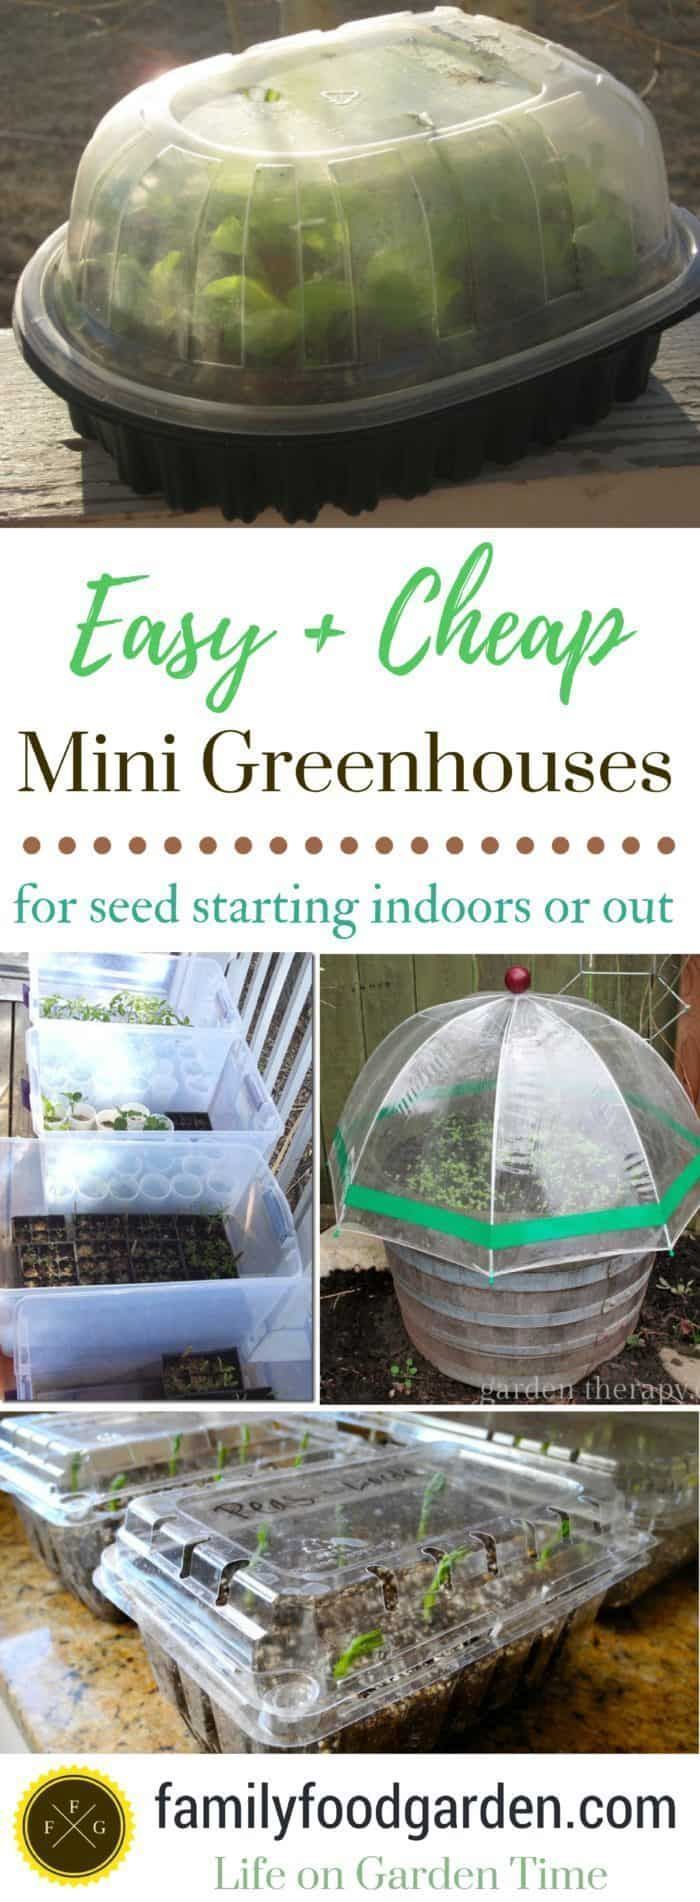 Cheap Mini Greenhouse for Seed Starting [year] | Family Food Garden - Cheap Mini Greenhouse for Seed Starting [year] | Family Food Garden -   15 diy Garden indoor ideas